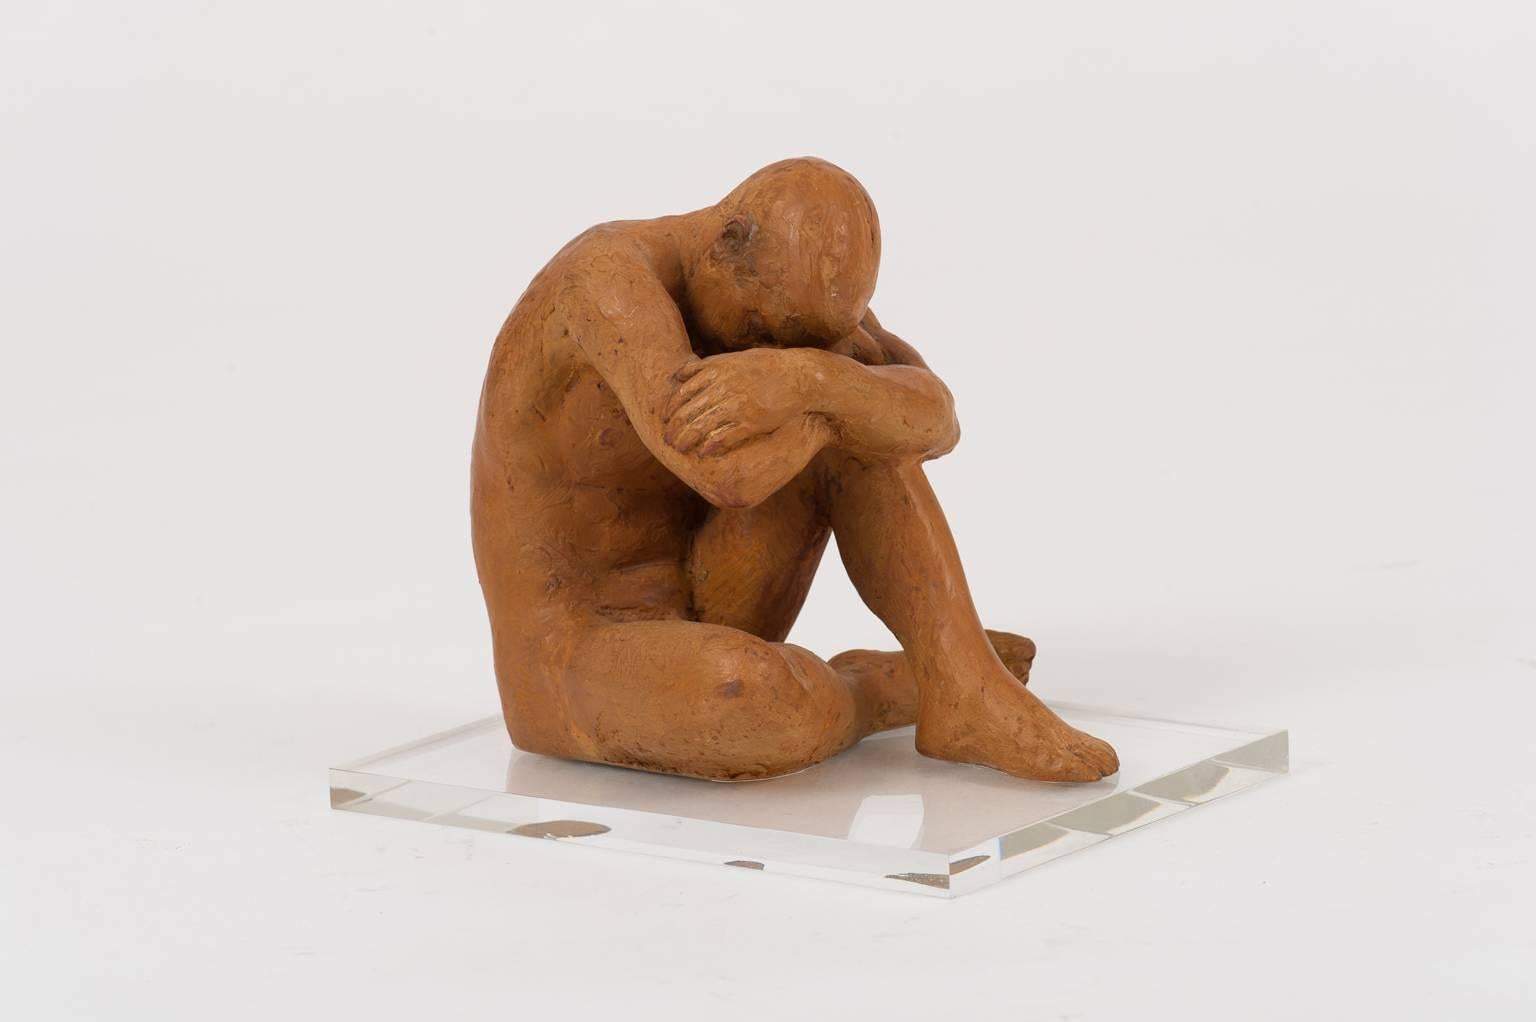 A terracotta sculpture depicting a reclining nude man, superbly stylised and executed.
Mounted on a modern Perspex base, 
France, circa 1940
Measures: 26 cm high by 22 cm high by 19 cm deep.